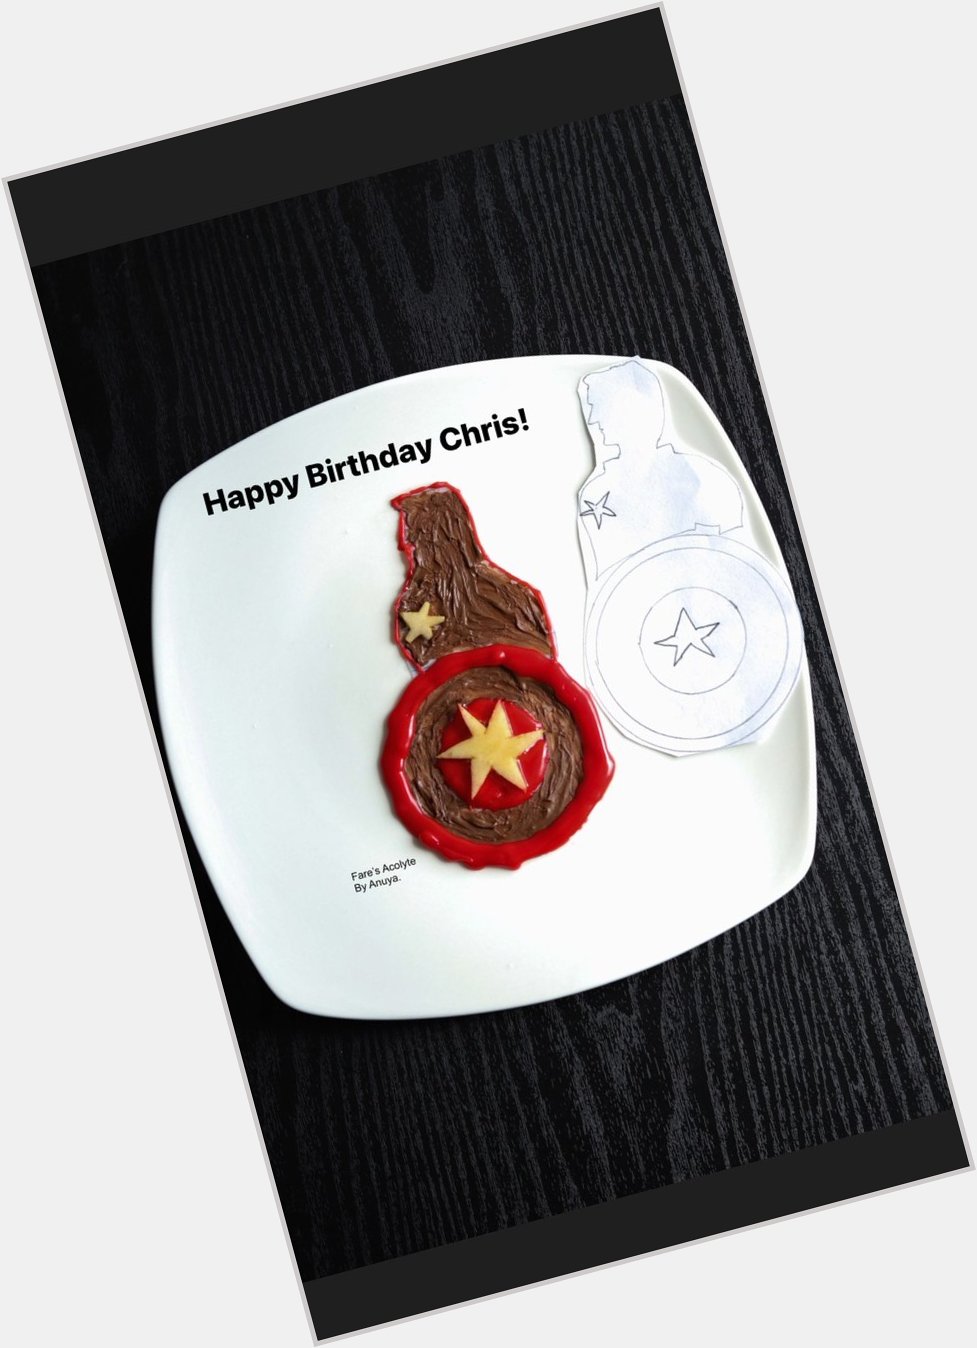  Wish you a very happy birthday our Prince Chaming! Hope you like this food art. 